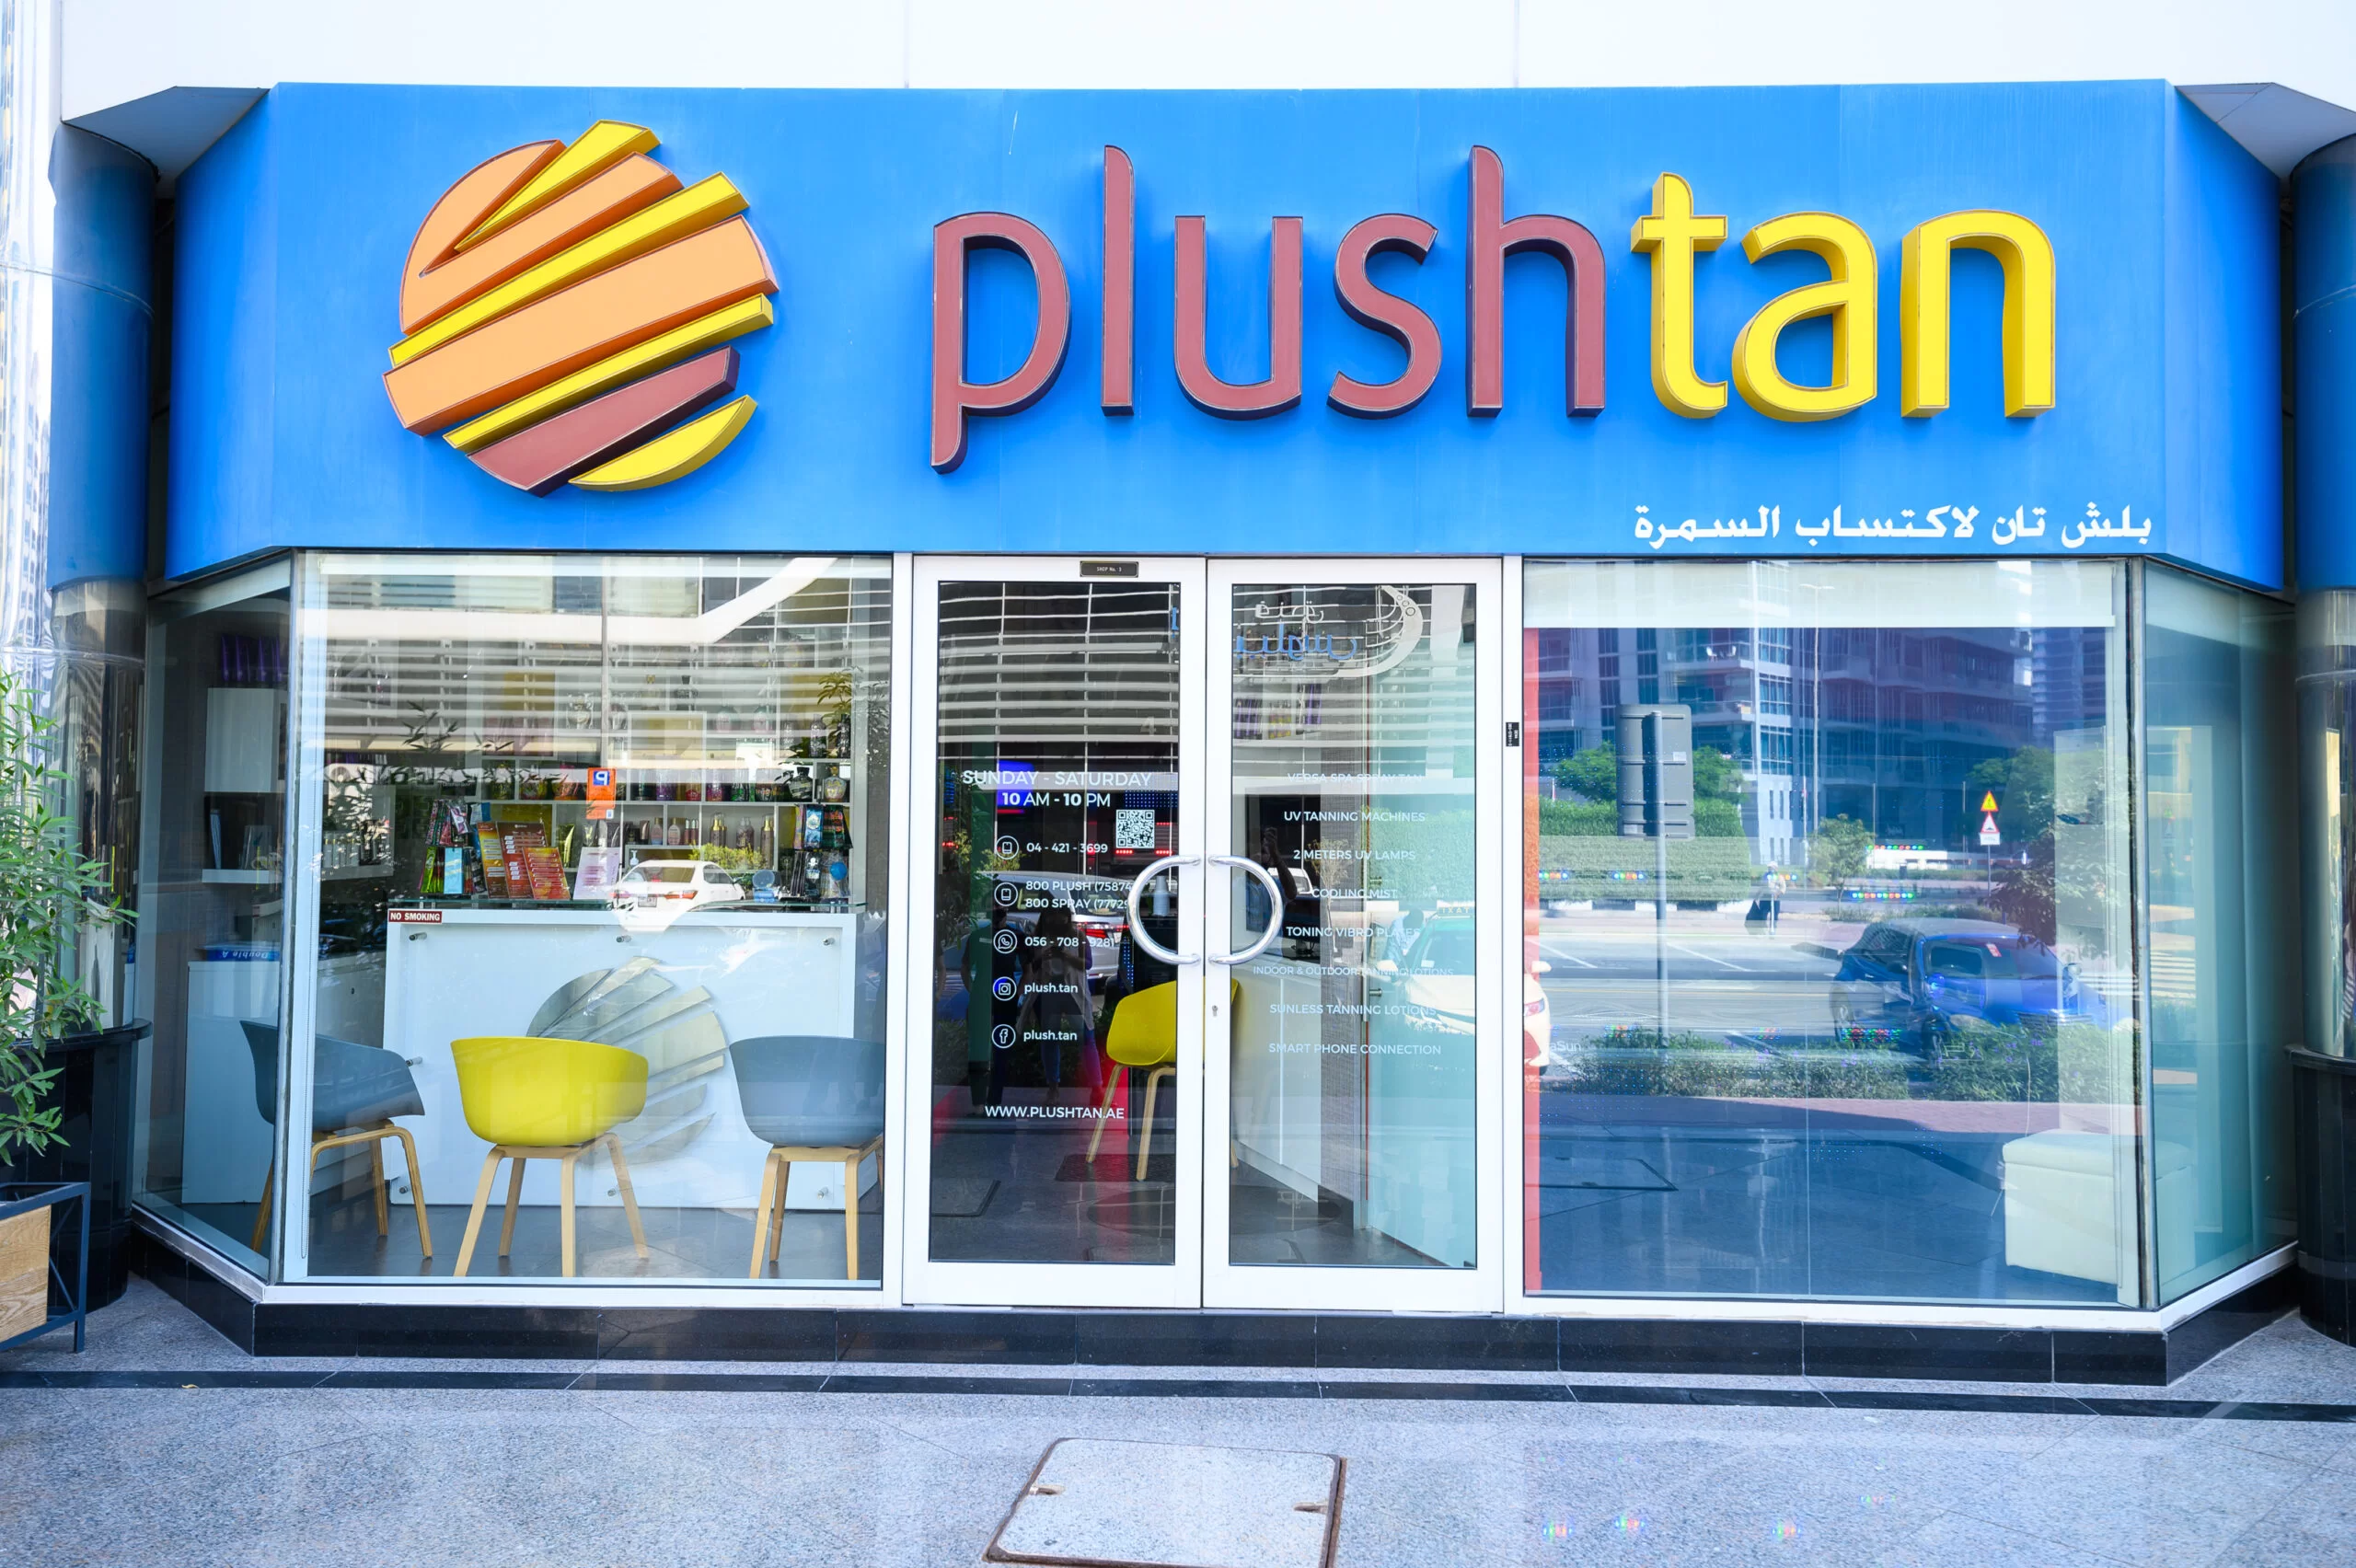 Plush Tan Dubai in United Arab Emirates, Middle East | Tanning Salons - Rated 5